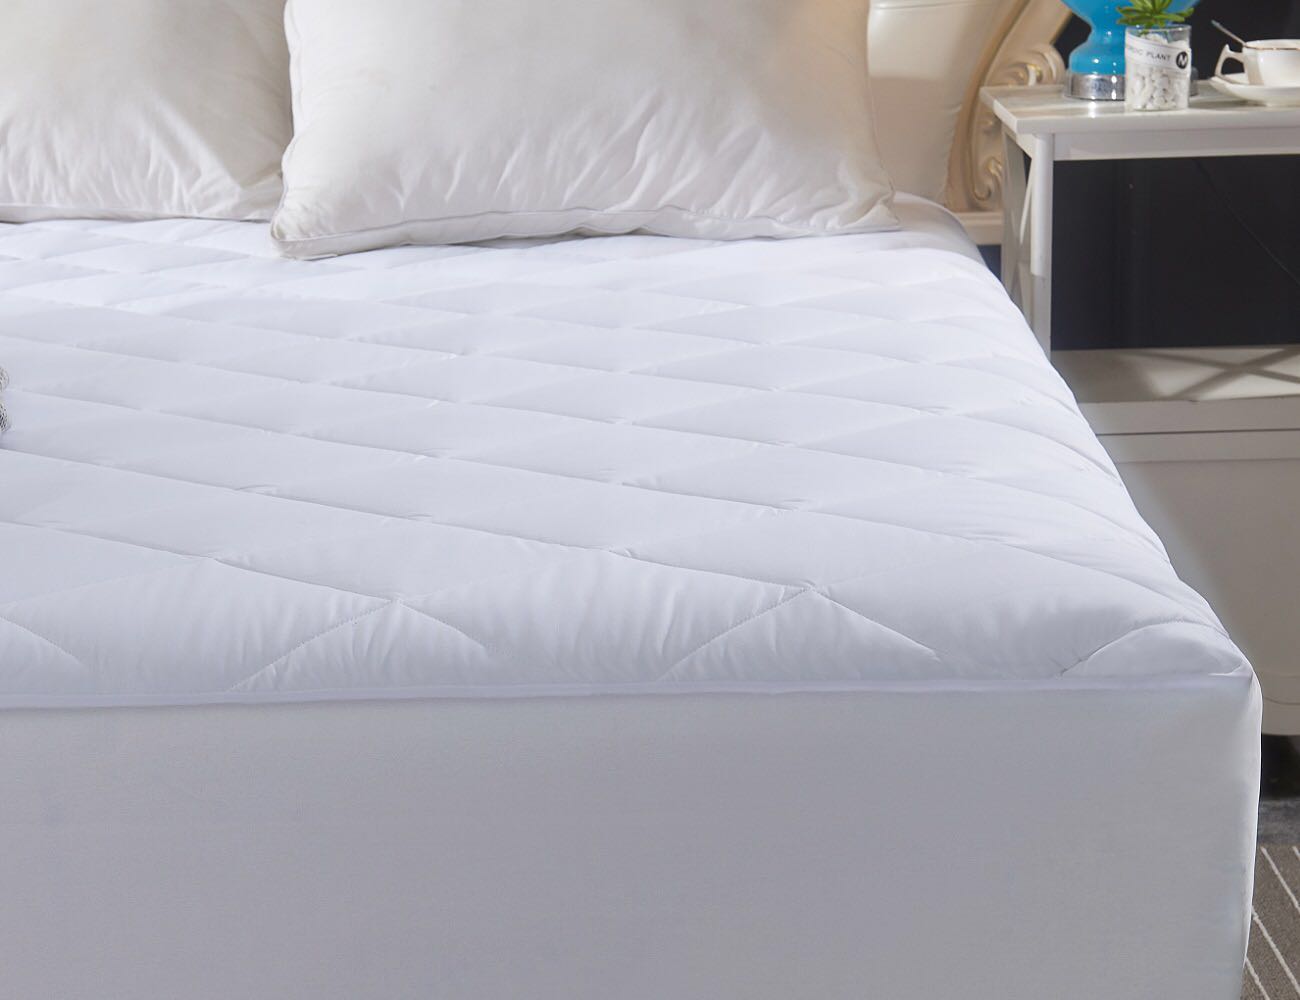 product-Rayson Mattress-Hypoallergenic waterproof mattress cover protector wholesale-img